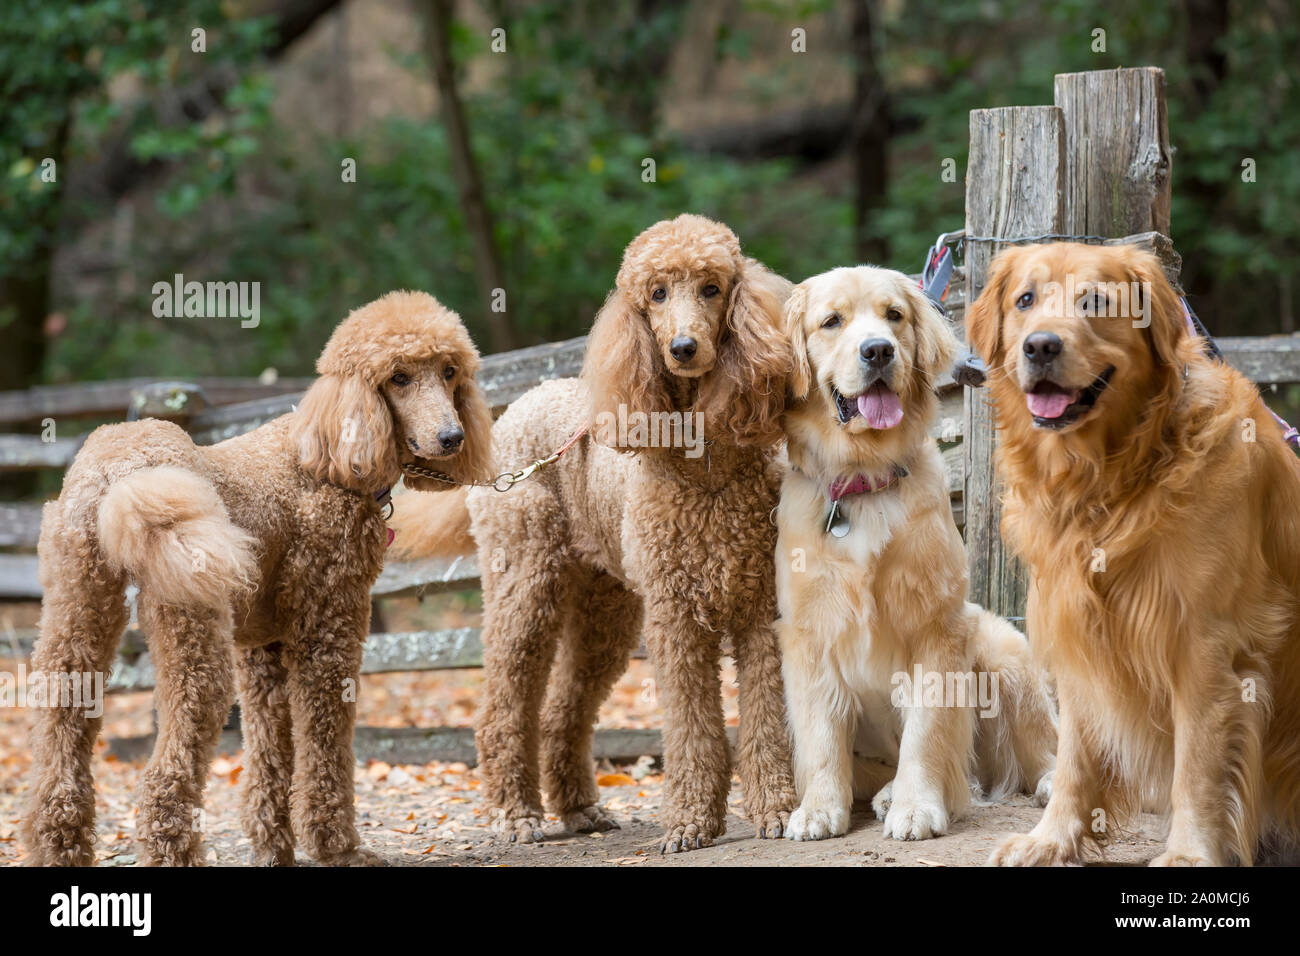 Poodles and Golden Retrievers on leash in park. Stock Photo